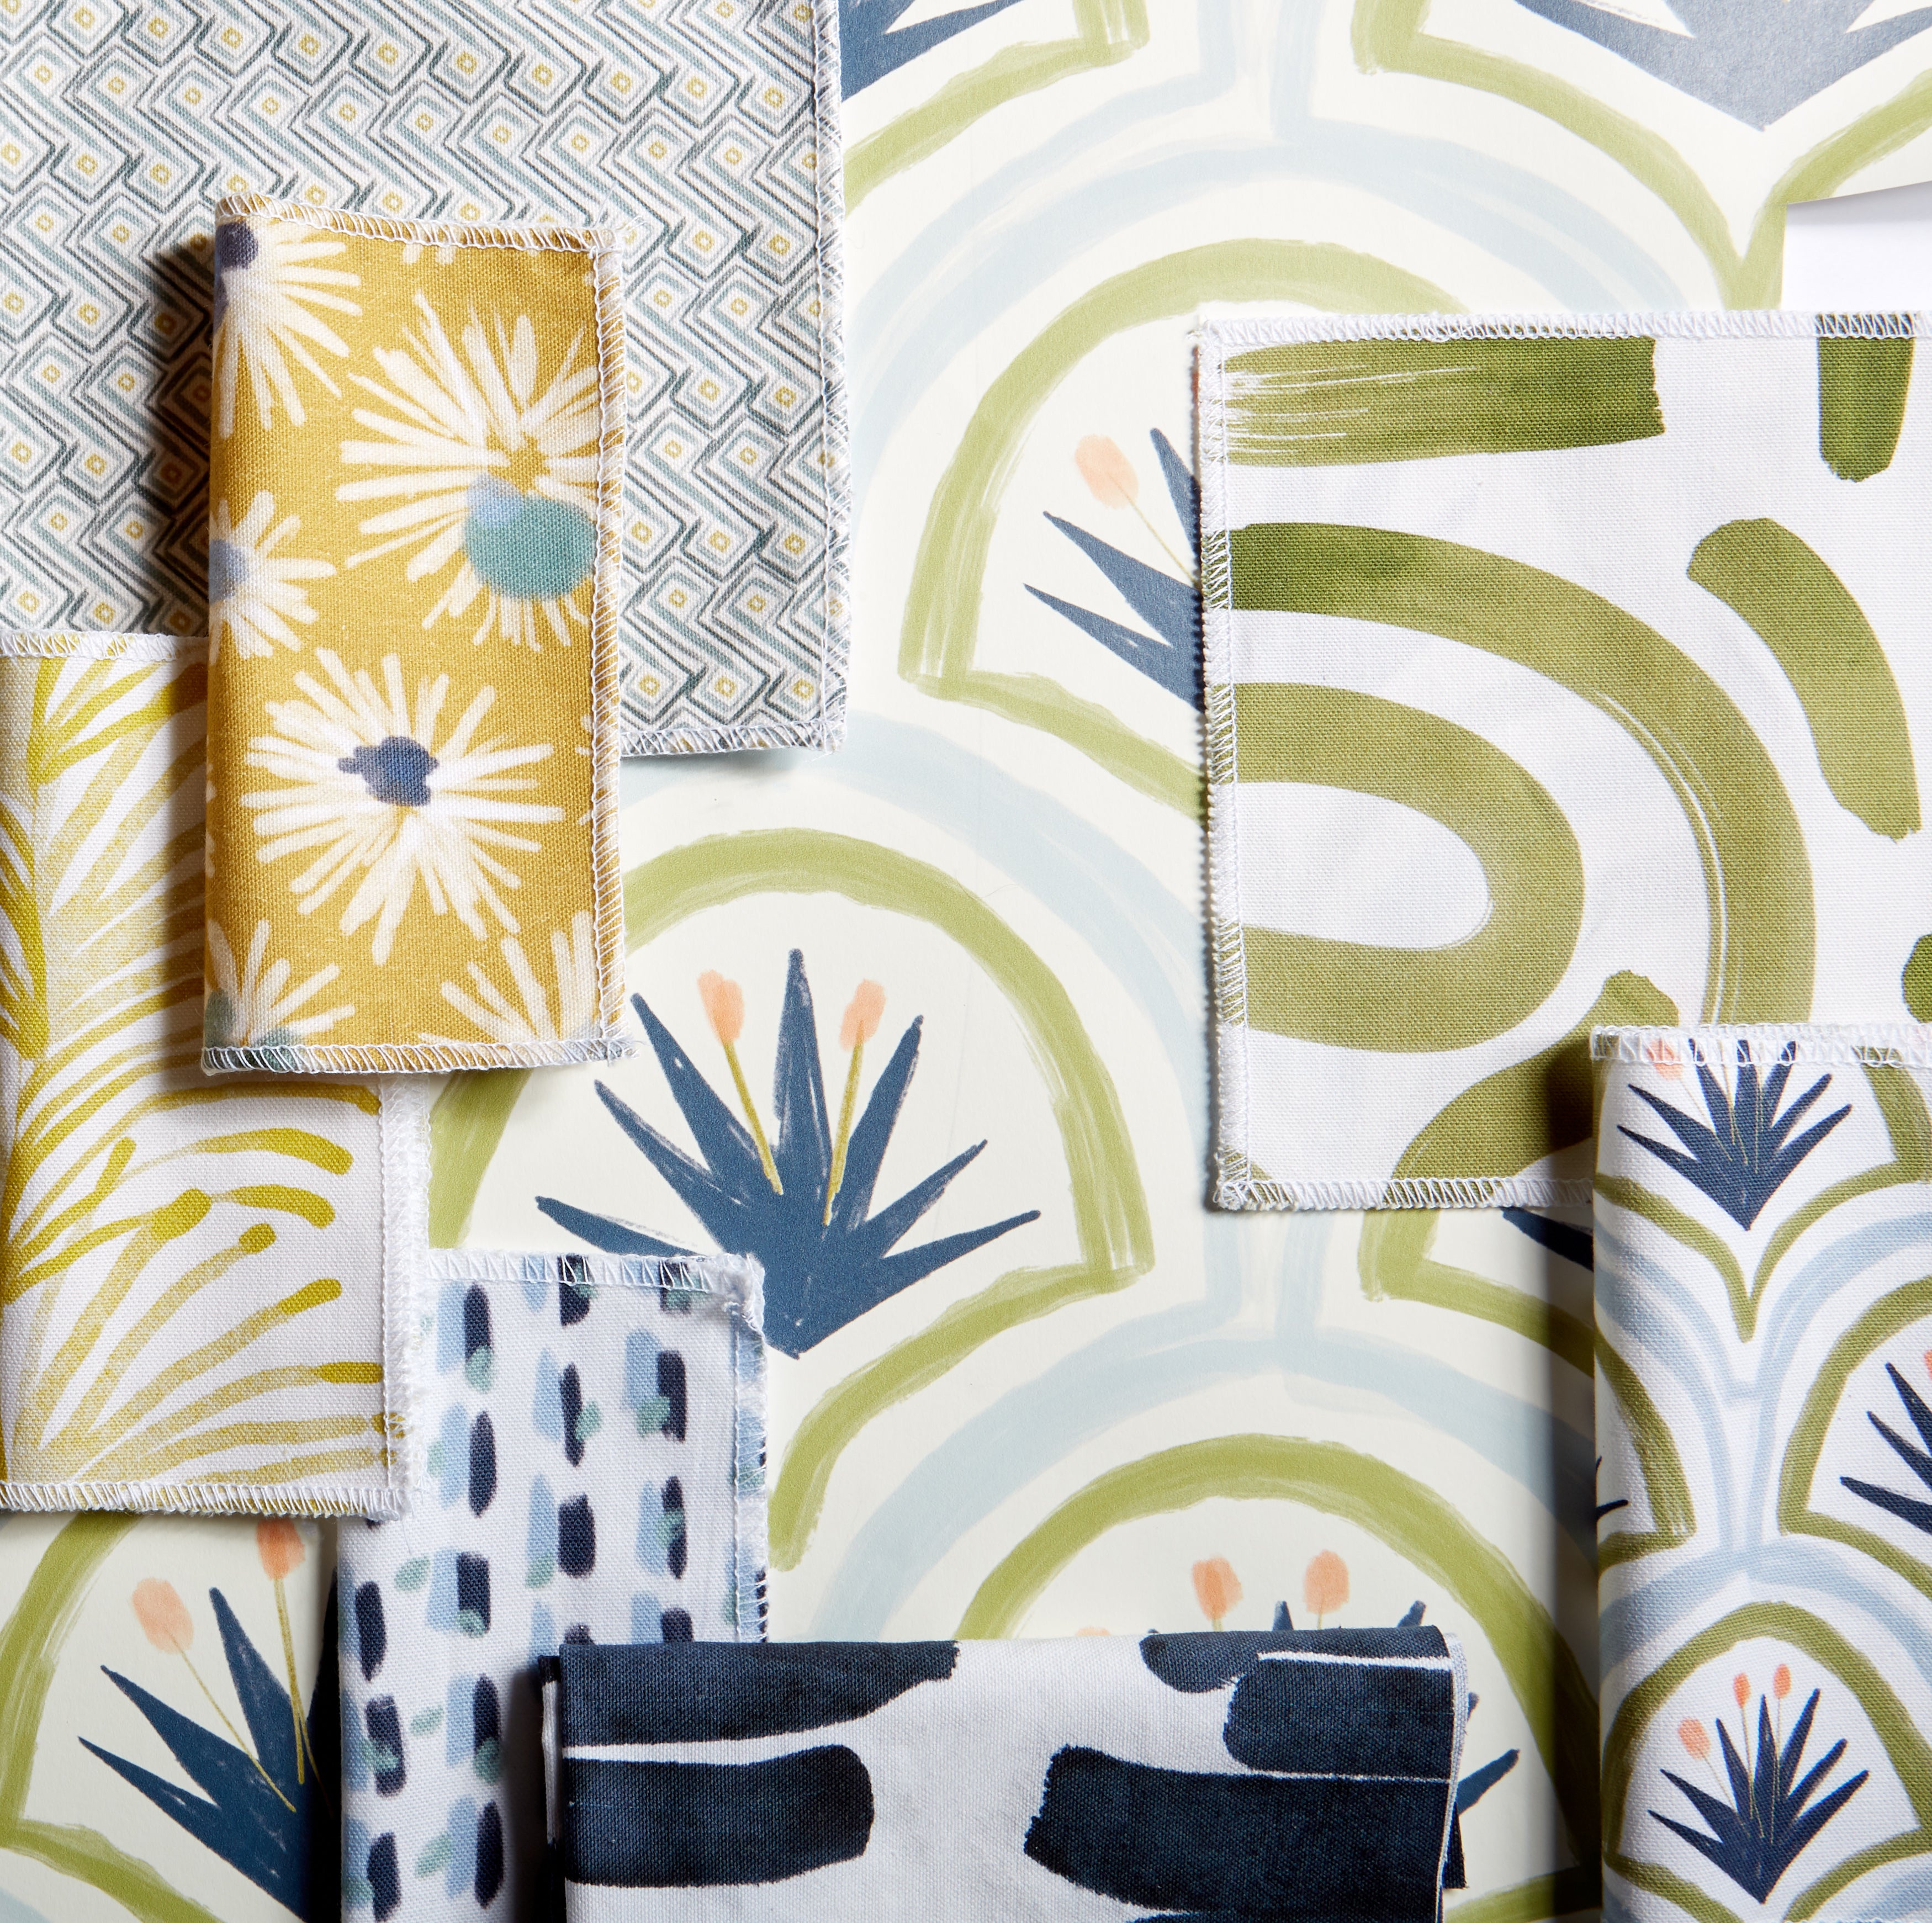 Interior design moodboard and fabric inspirations with Moss Green Printed Swatch, Art Deco Palm Pattern Printed Swatch, Sky and Navy Blue Poppy Printed Swatch, and Navy Brushstokes Pattern Printed Swatch